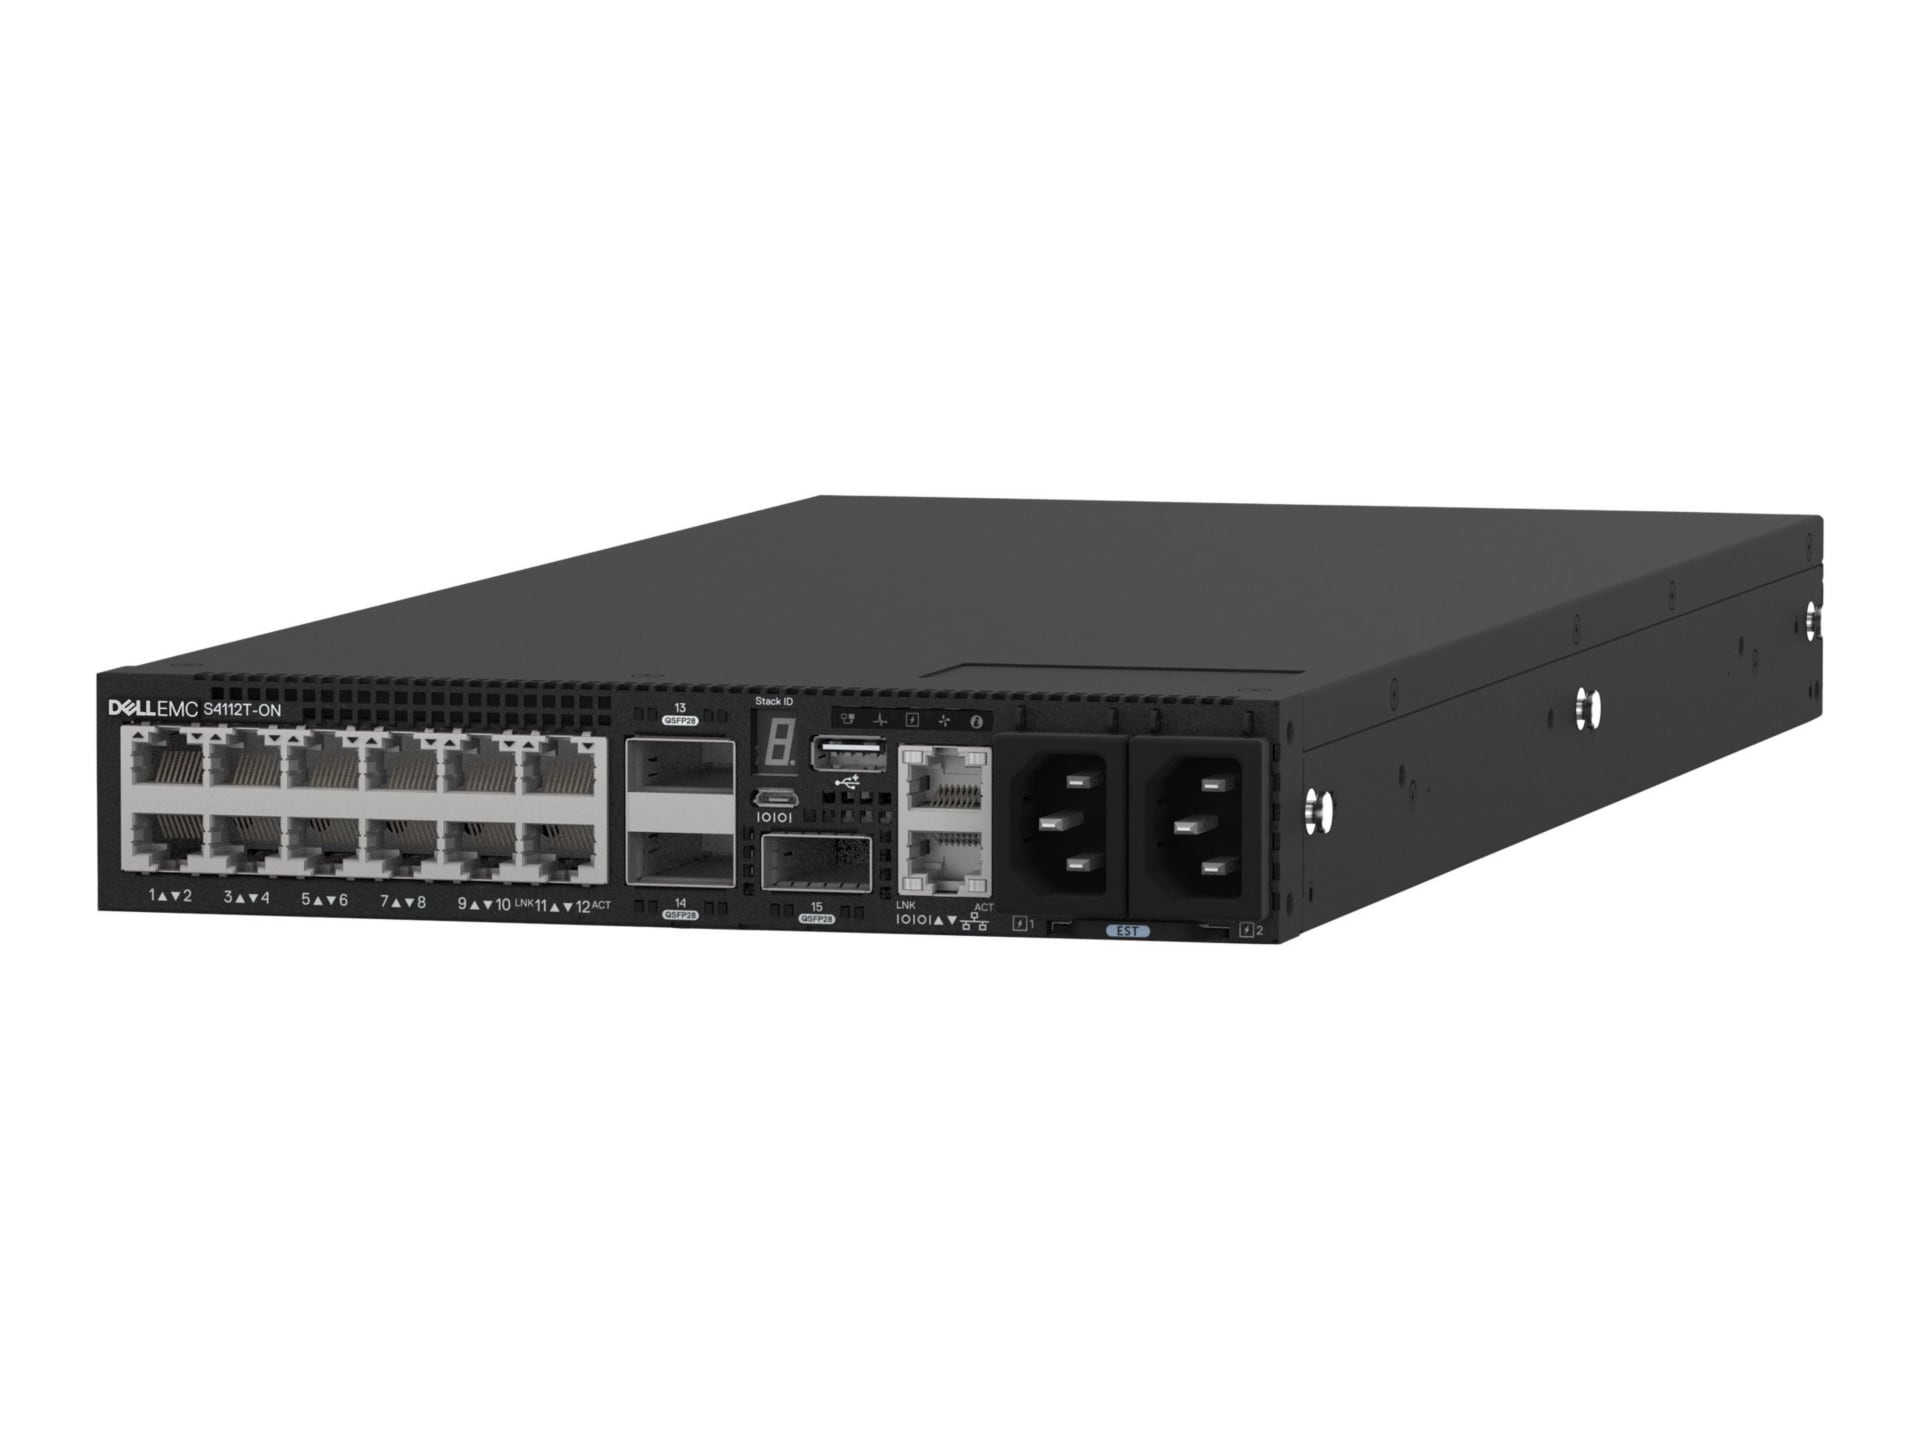 Dell Networking S4112T - switch - 12 ports - managed - rack-mountable - Dell Smart Value